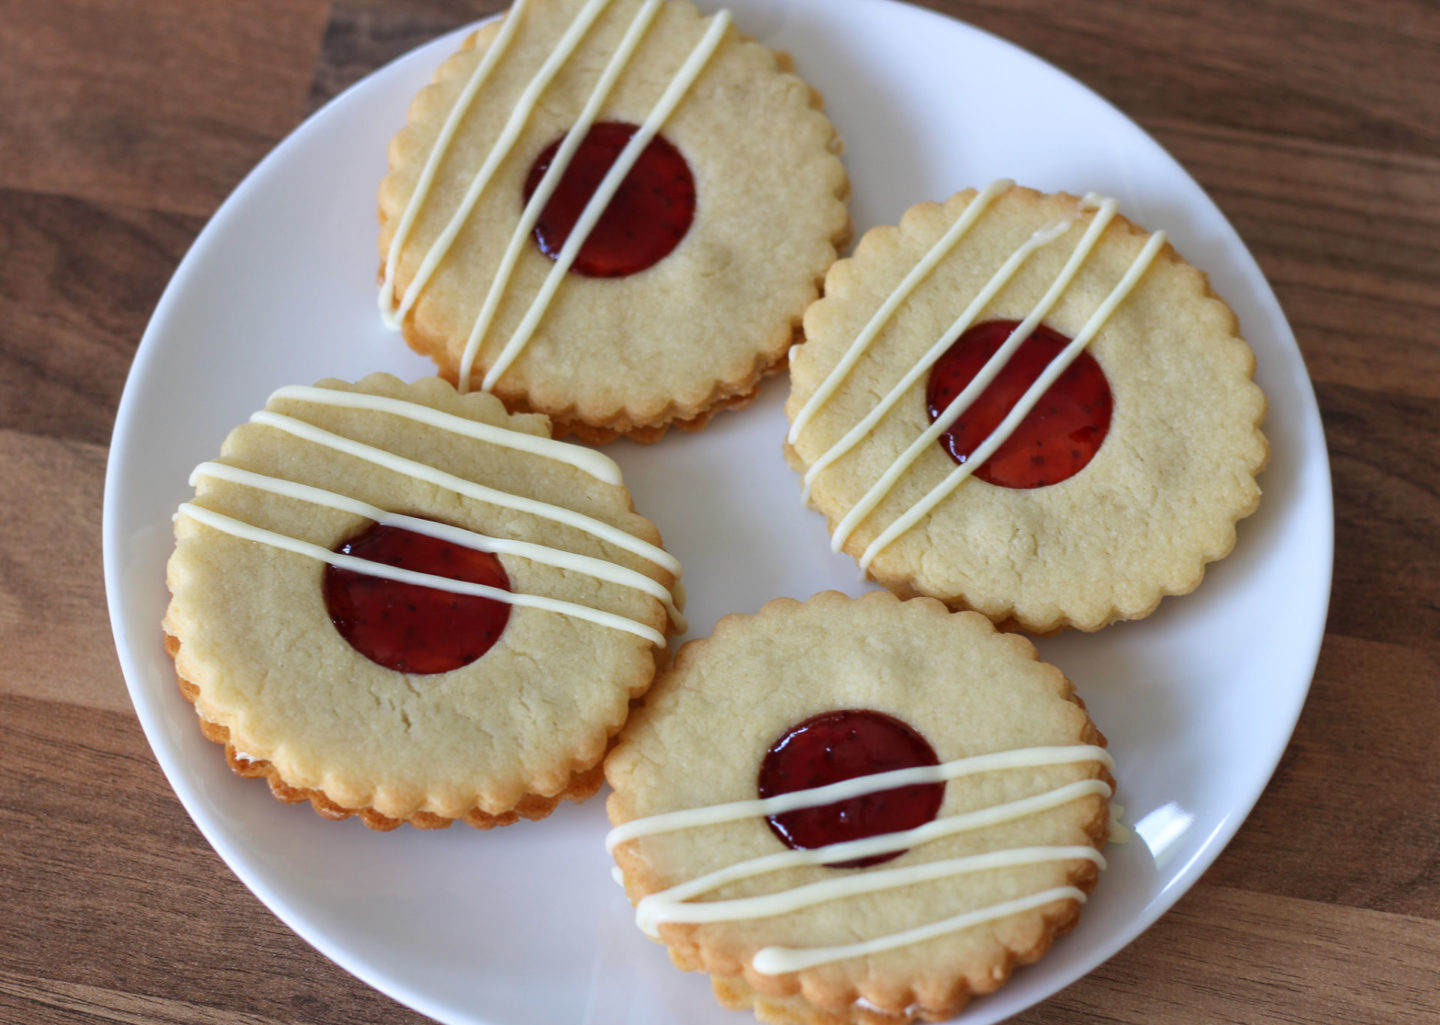 Plate of four strawberry and vanilla sandwich biscuits